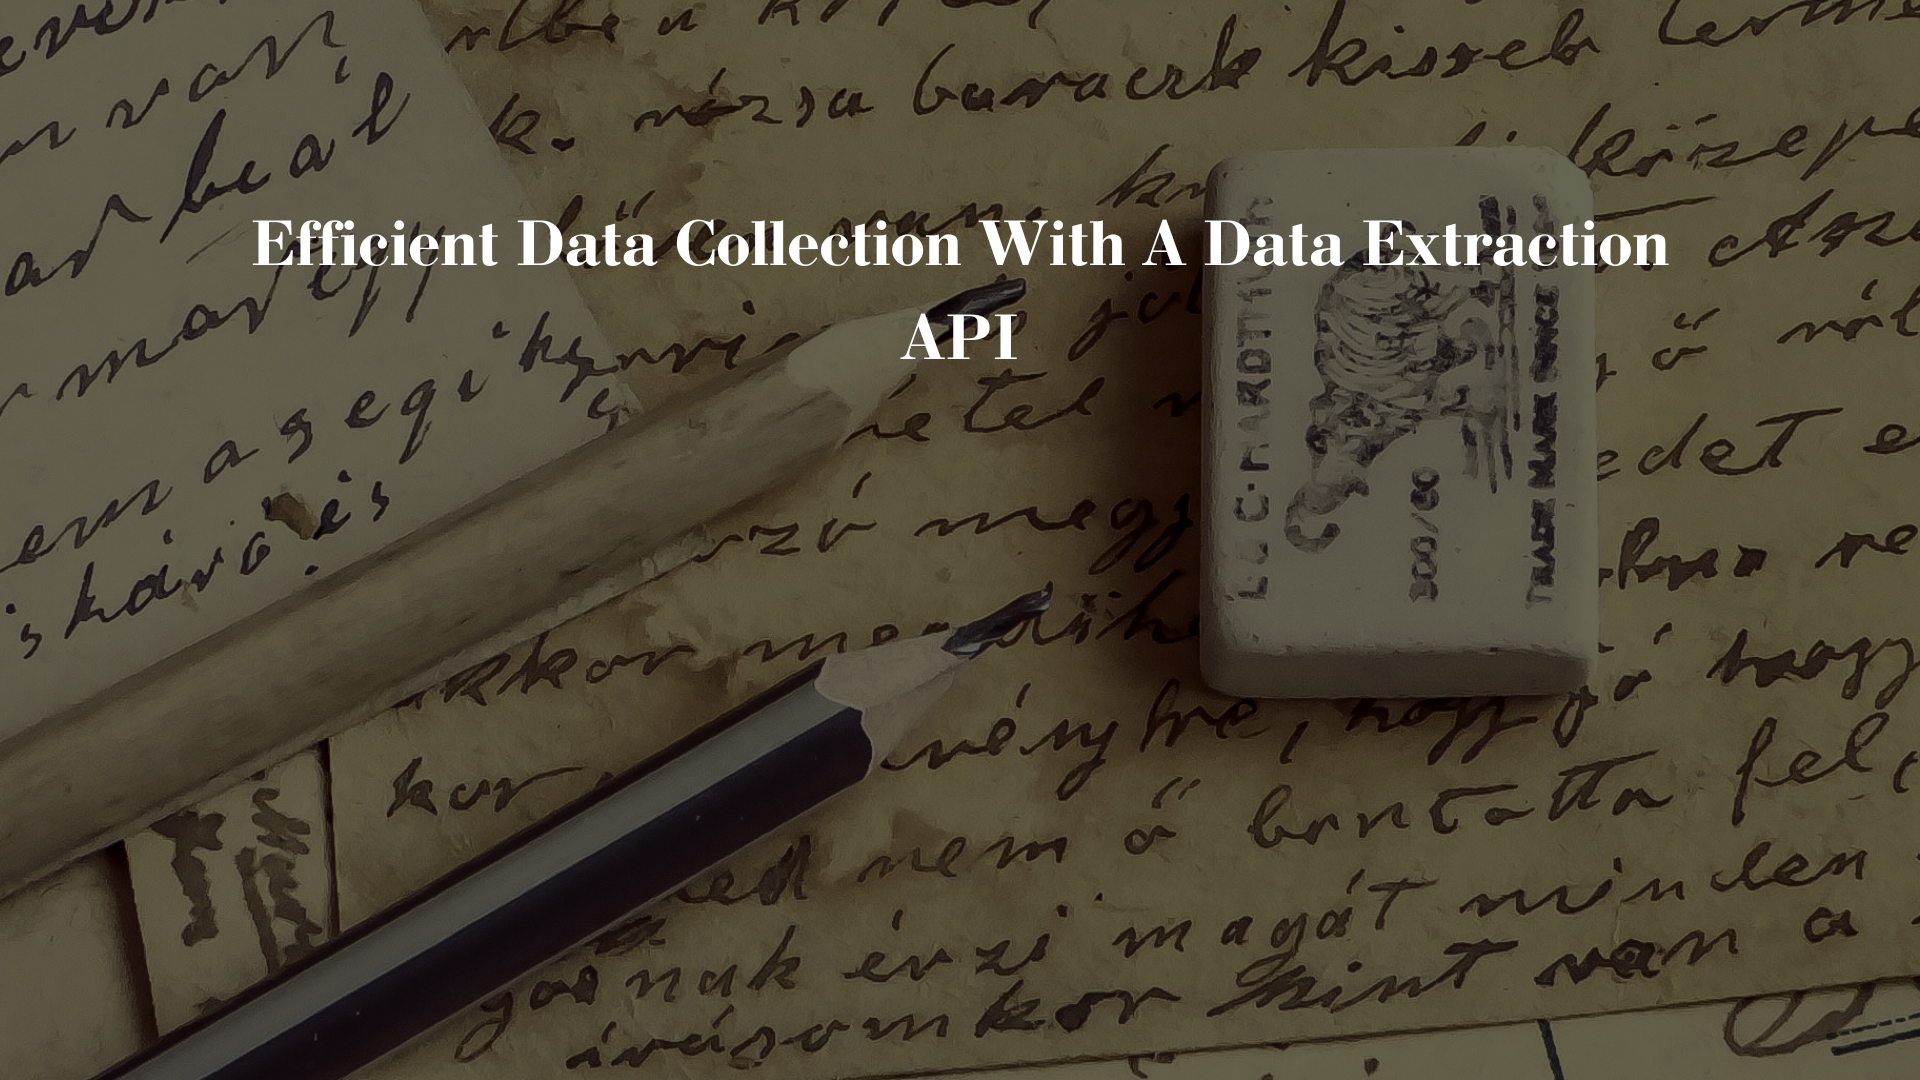 Efficient Data Collection With A Data Extraction API